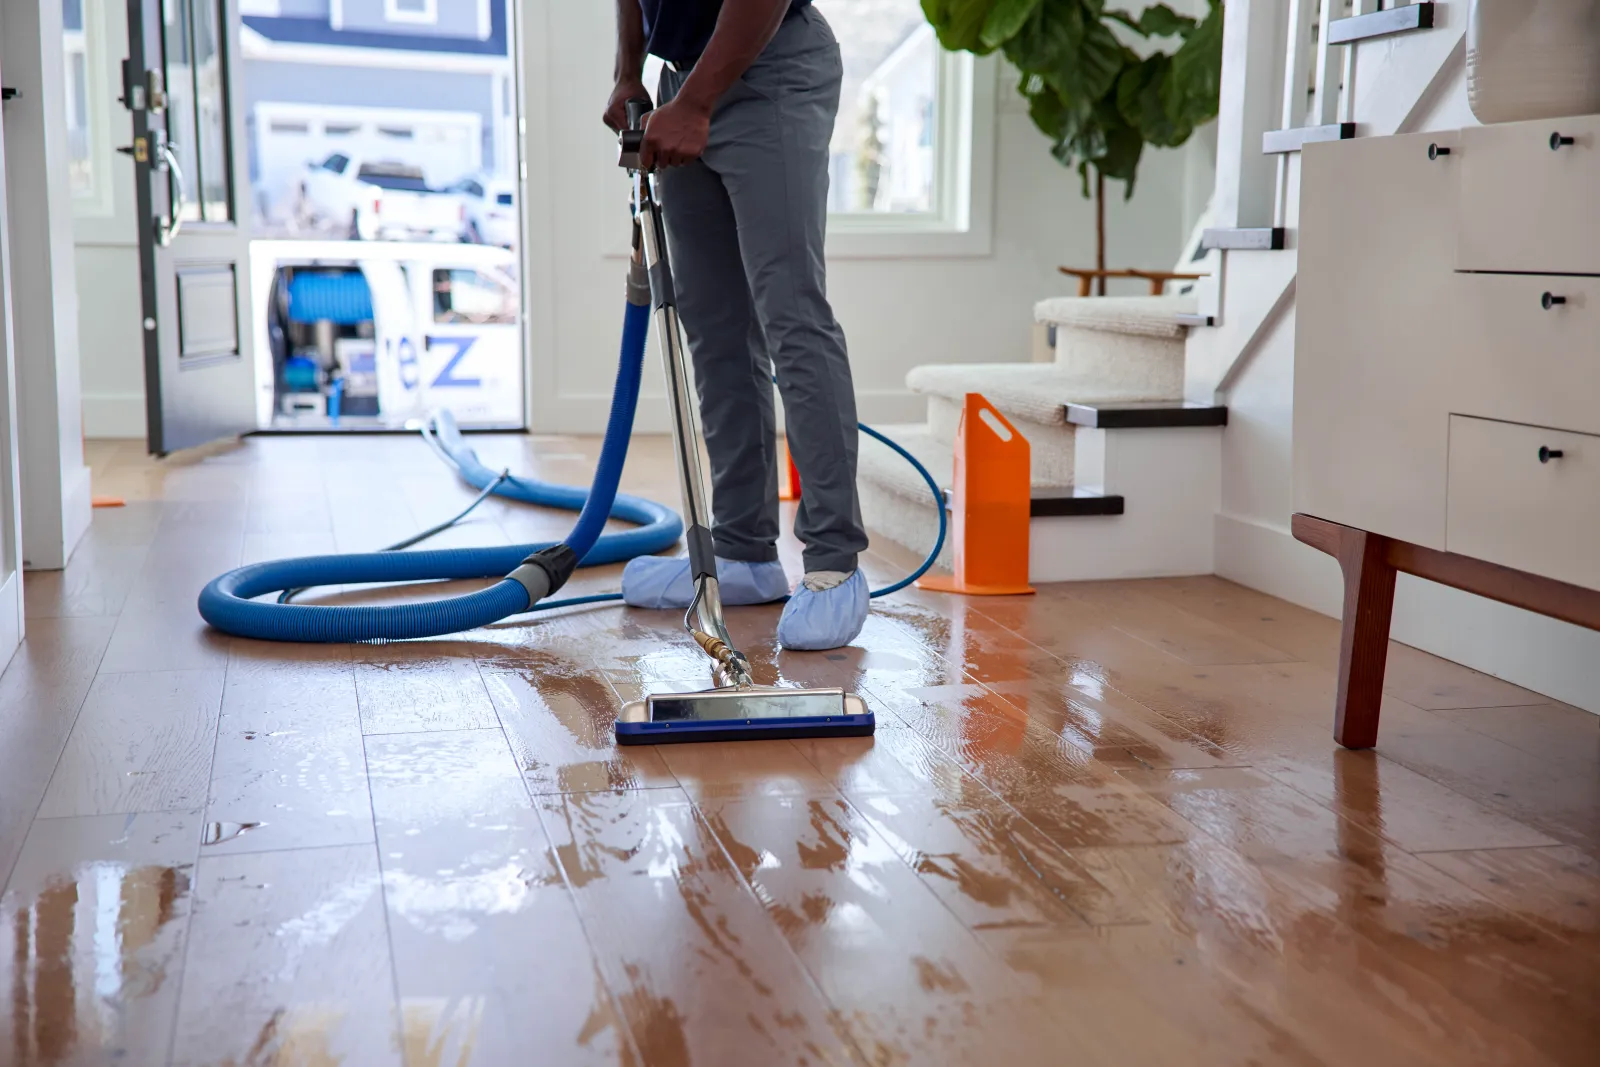 one reason why hardwood floors are slippery is because they are wet. Zerorez® technician is seen cleaning a hardwood floor in a home with the door open behind him and the Zerorez van parked outside